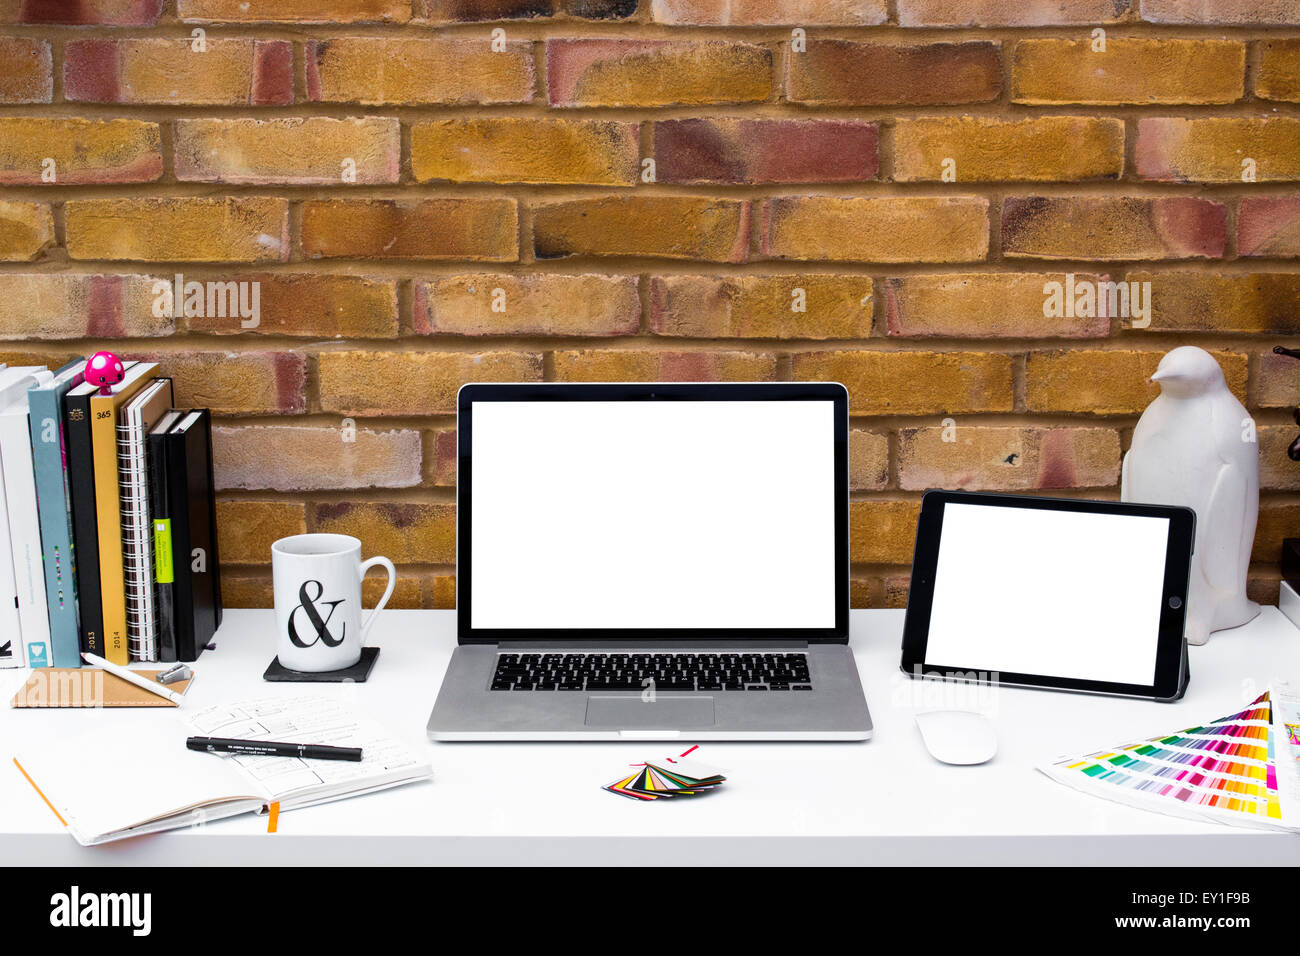 Creative Home Office space with graphic designers desk with laptop against a brick wall. Stock Photo